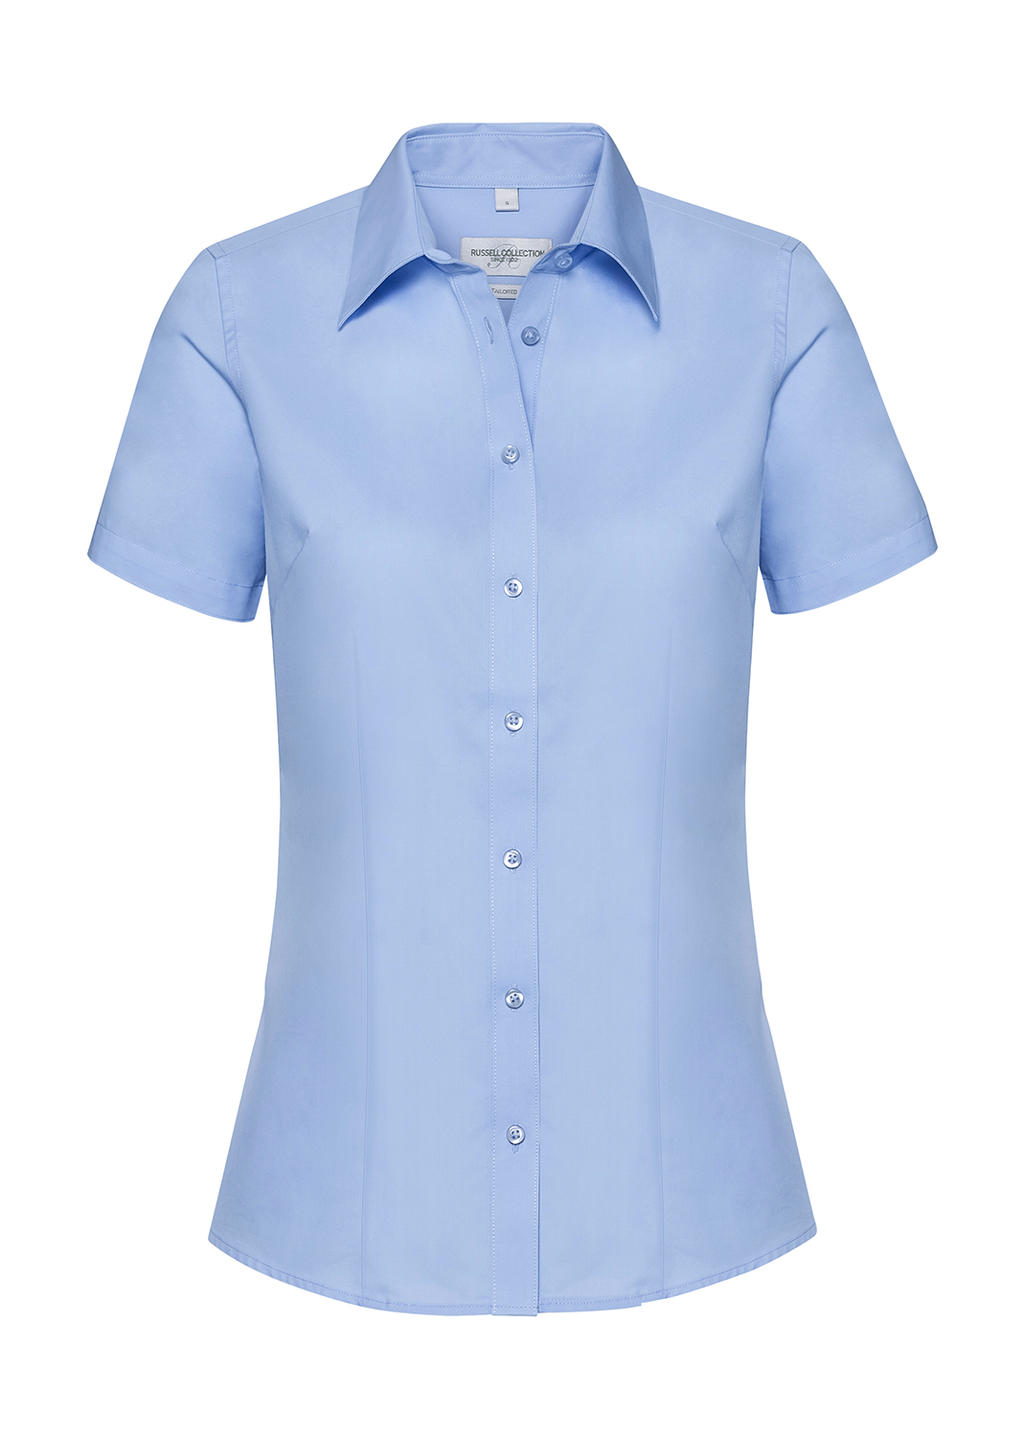  Ladies Tailored Coolmax? Shirt in Farbe Light Blue